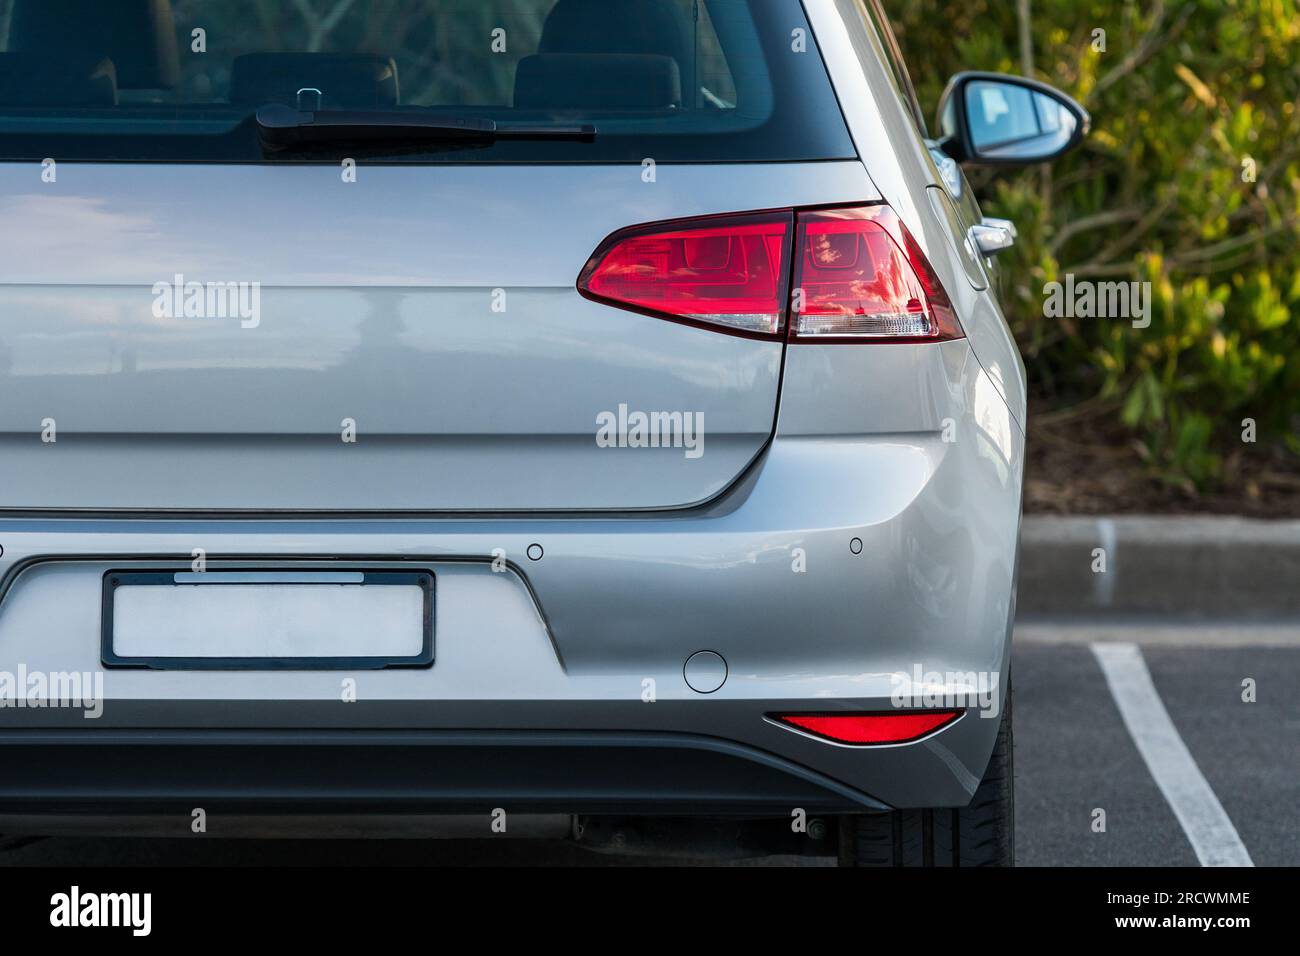 Back bumper and back lights of silver car parked on the street in summer sunny day, rear view. Stock Photo